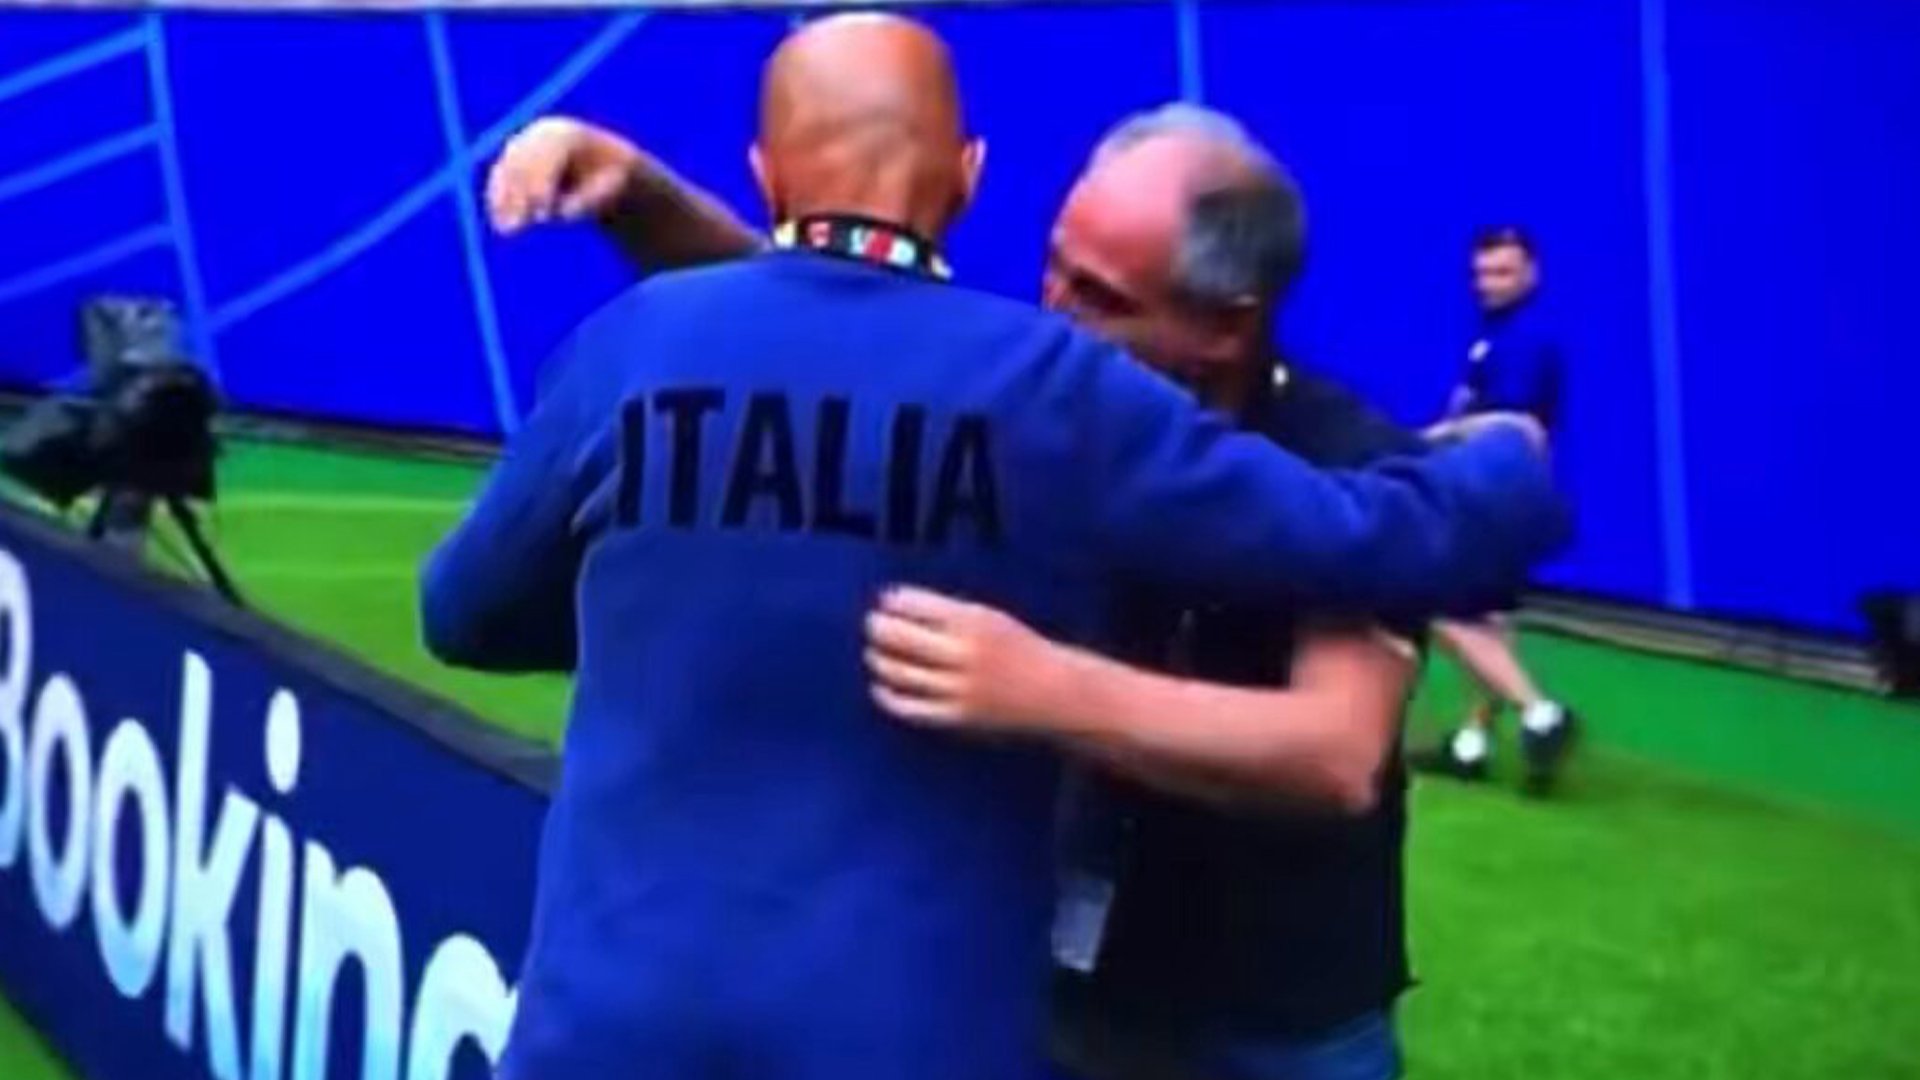 Heartwarming moment Italy manager Spalletti consoles Sky Sports journalist after death of his wife